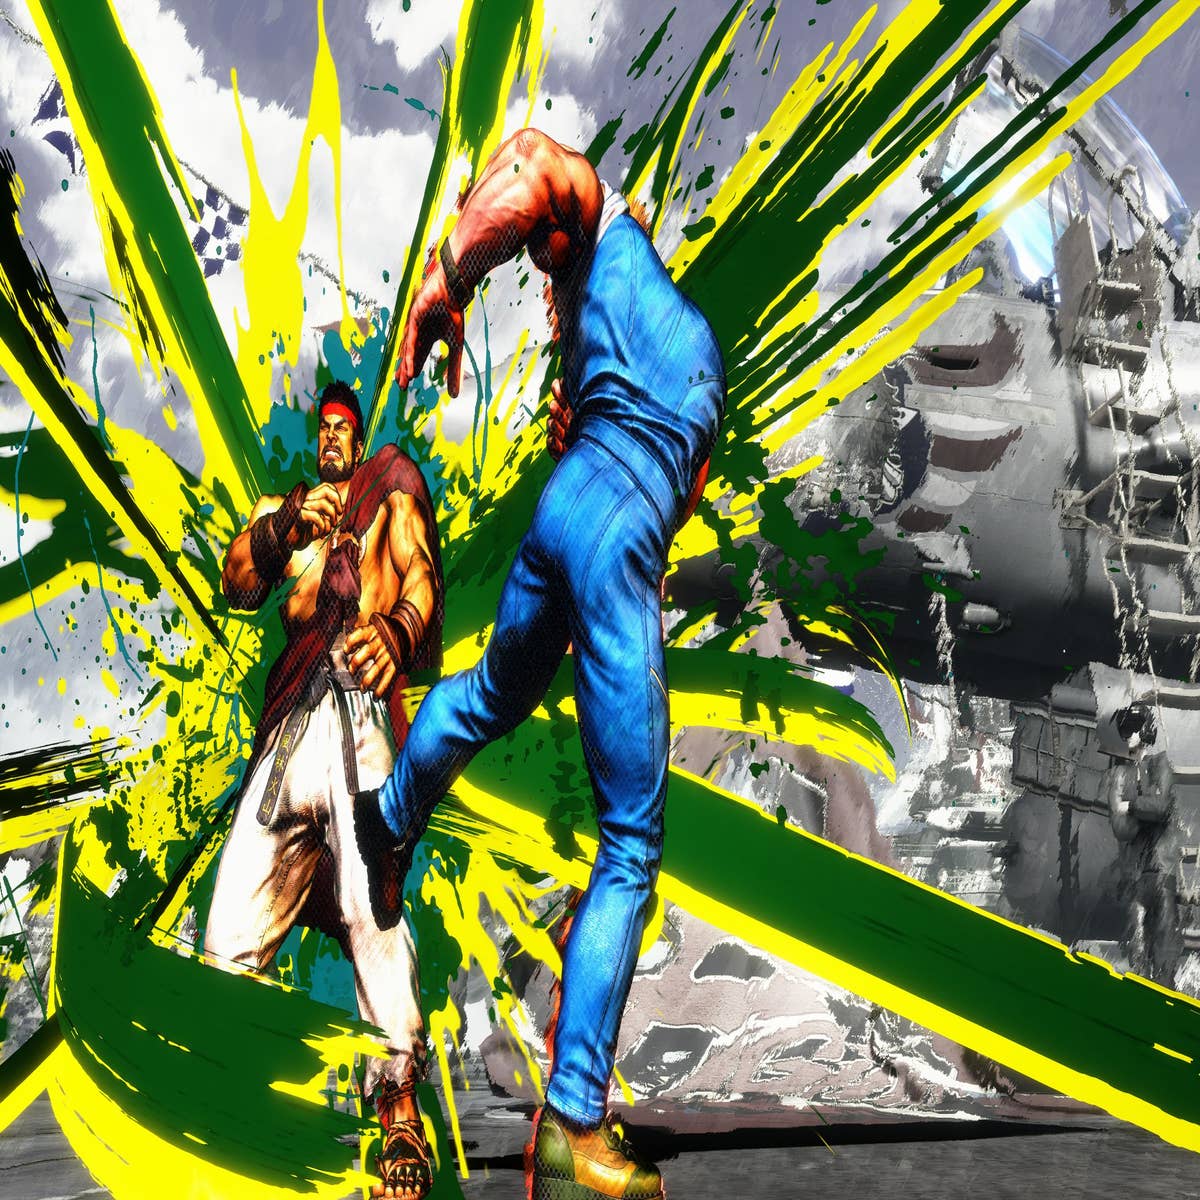 Street Fighter 6 Drive: Tips on the new game mechanics